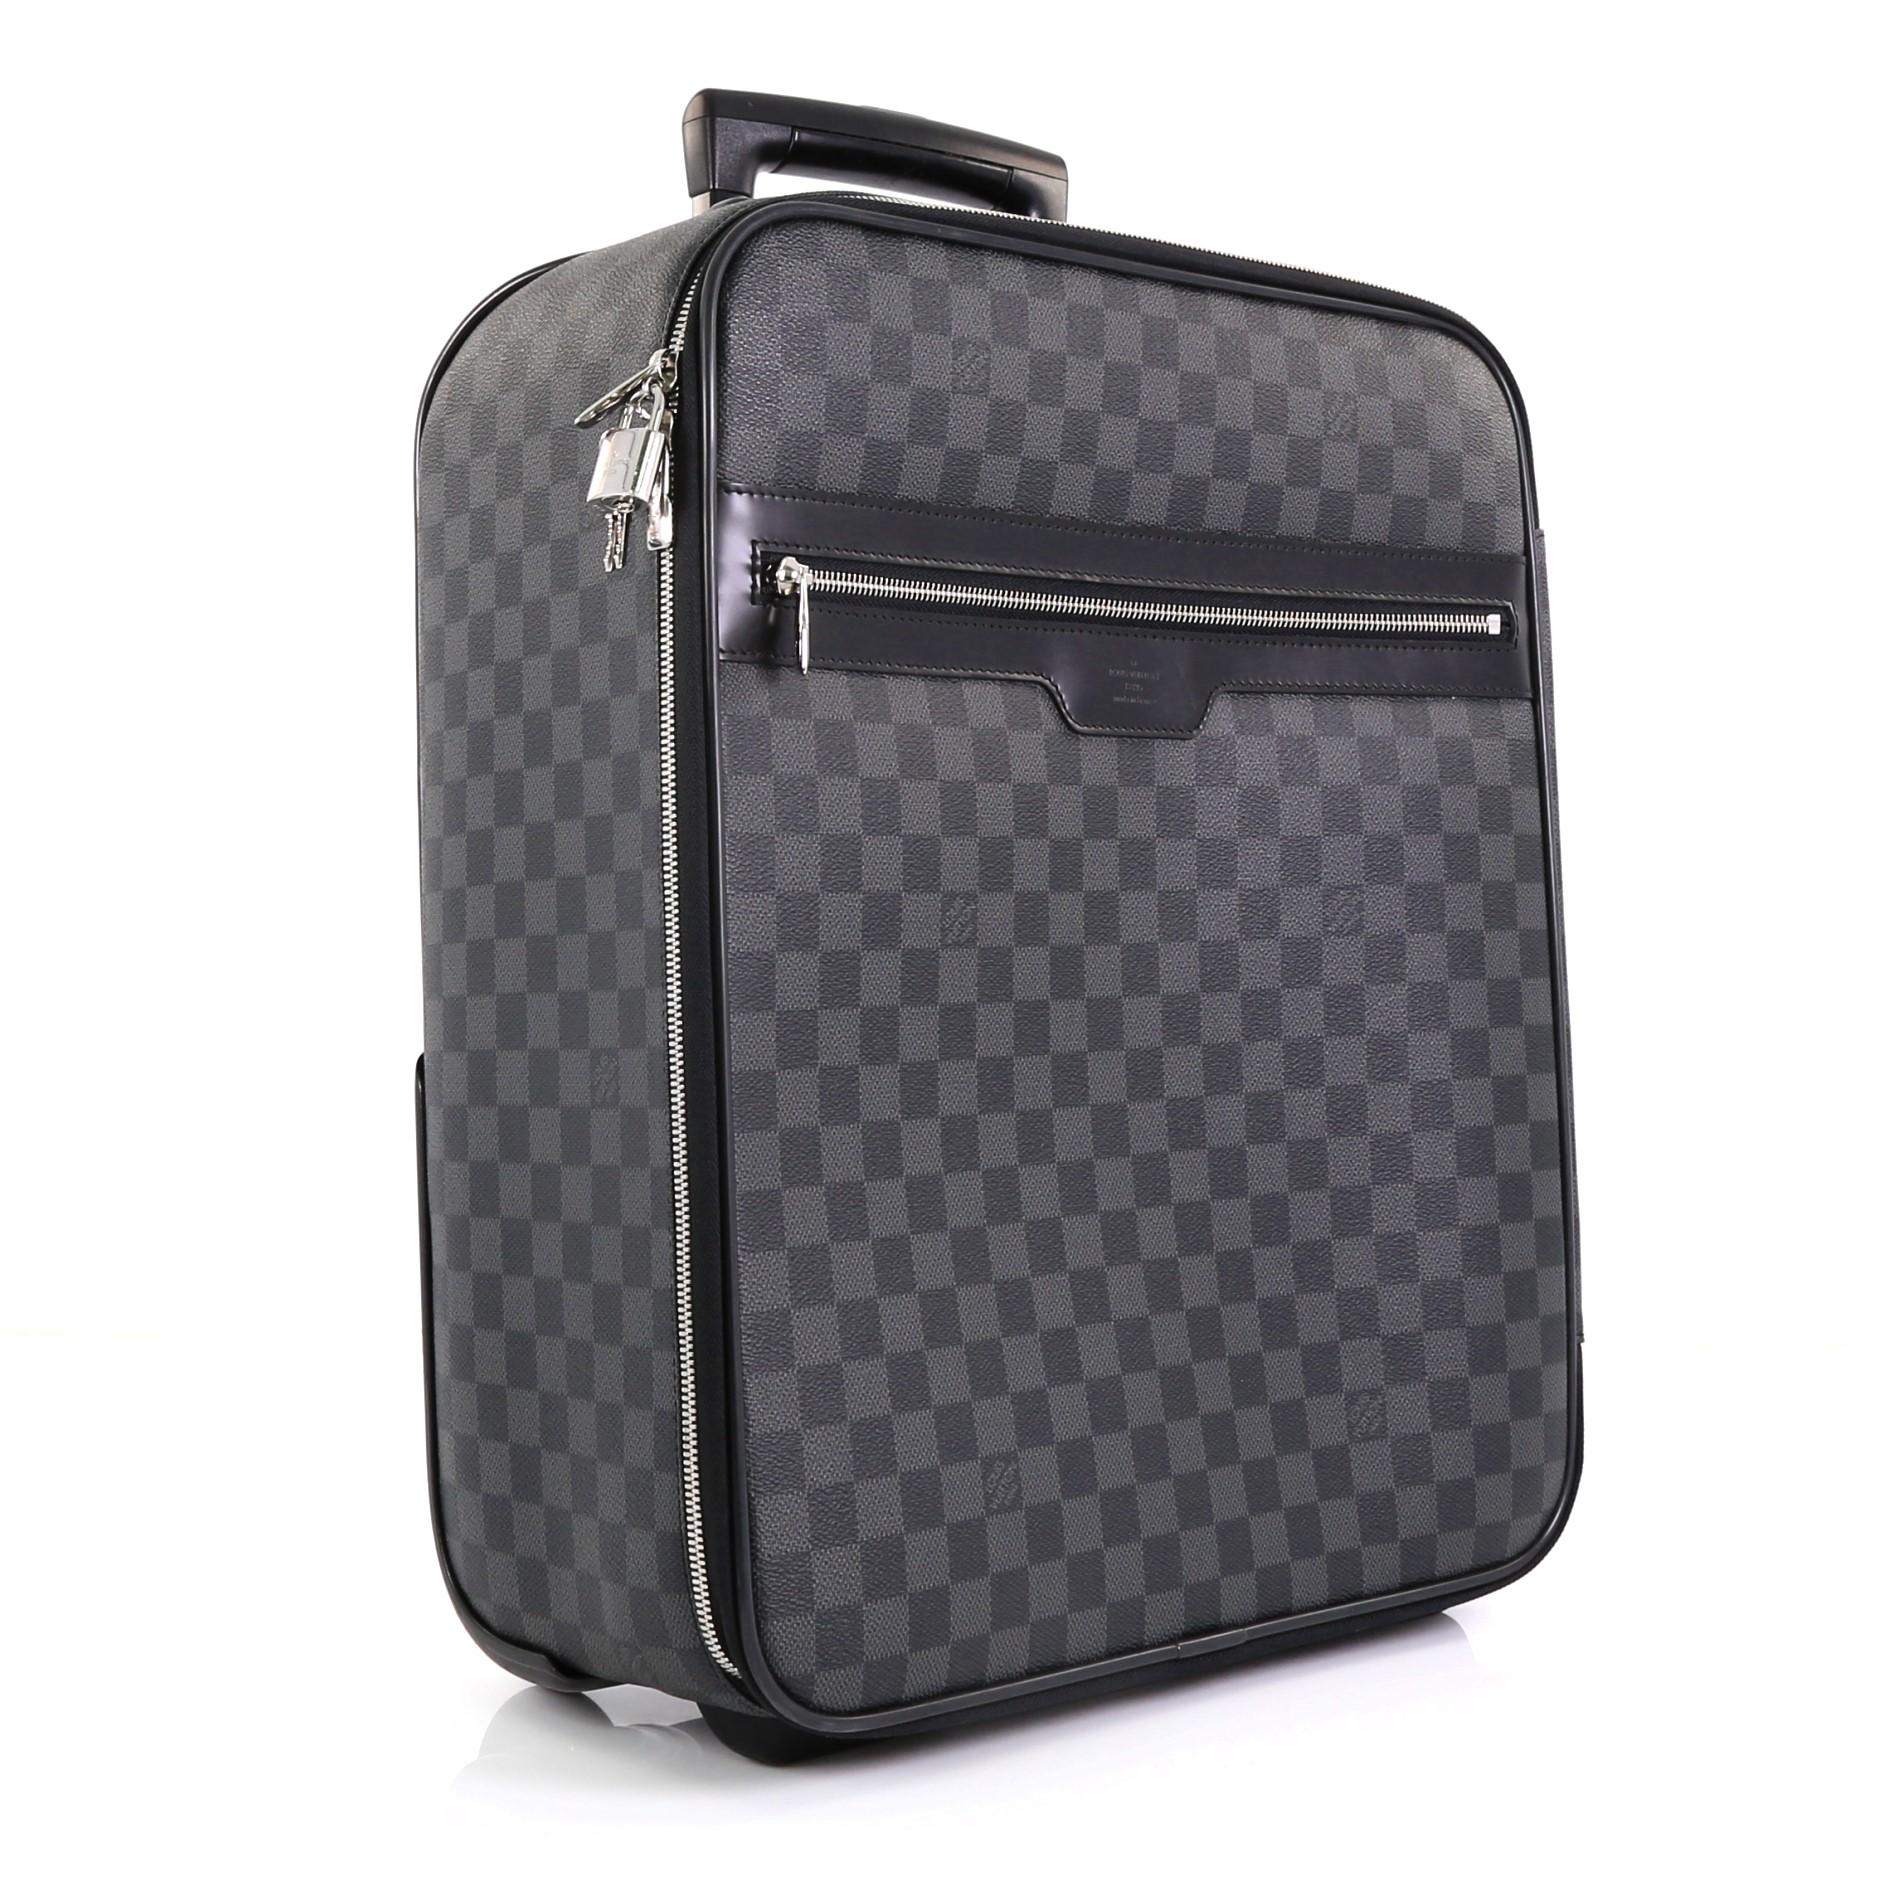 This Louis Vuitton Pegase Luggage Damier Graphite 45, crafted in damier graphite coated canvas, features exterior zip pocket, retractable handle with lock button, silent rolling system and silver-tone hardware. Its zip closure opens to a black